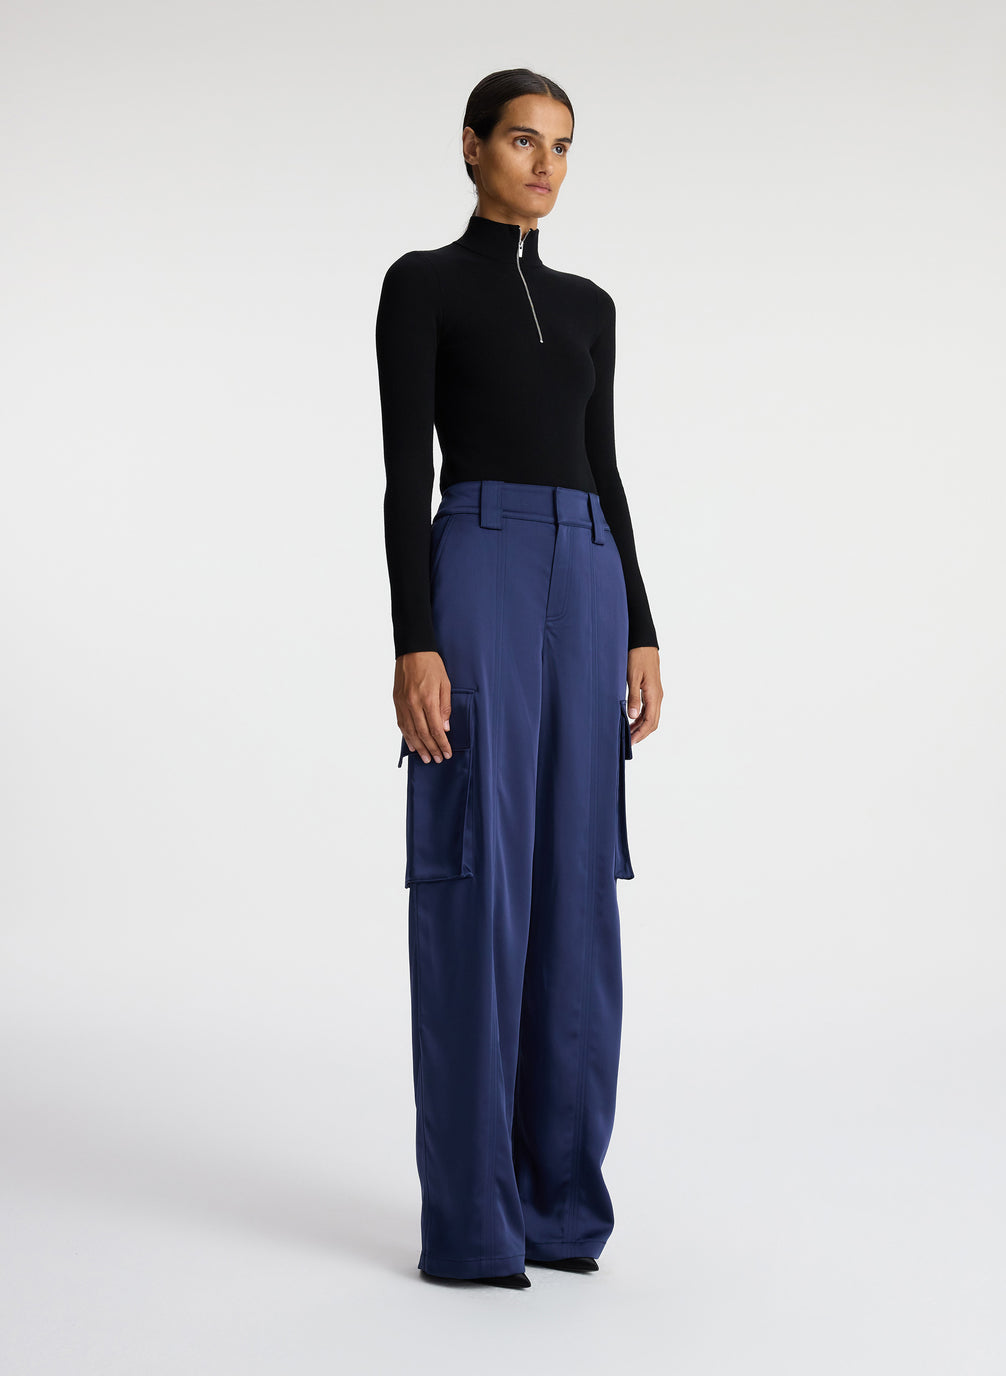 side view of woman wearing black knit long sleeve top and blue satin cargo pants